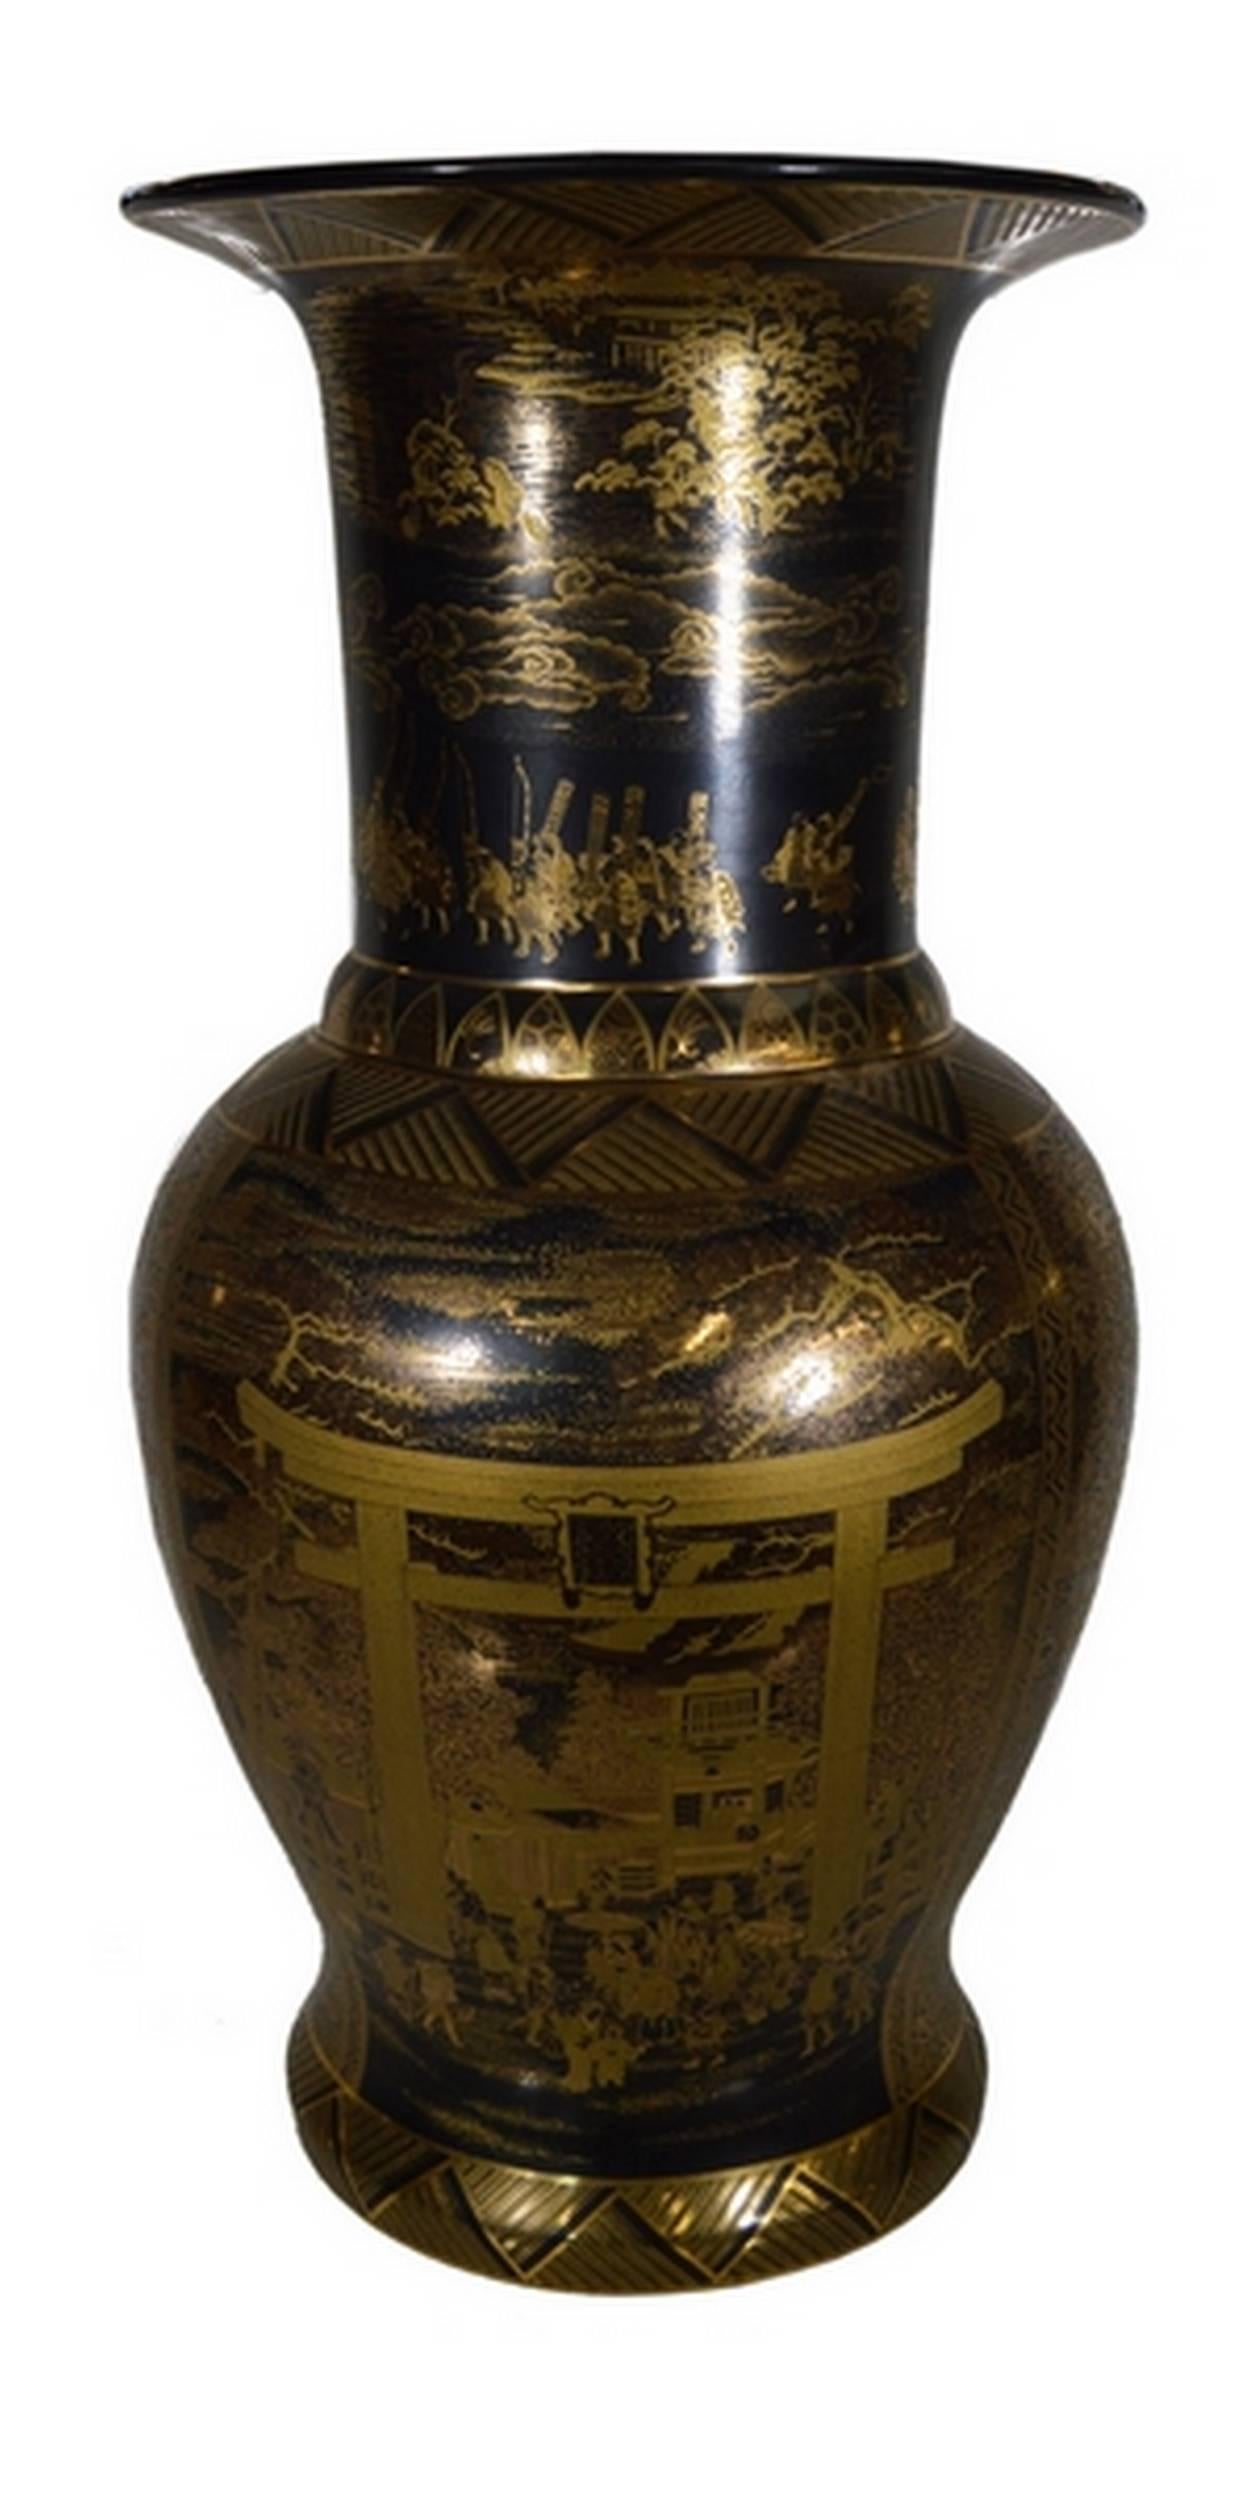 A vintage Chinese vase hand-painted in black and golden on porcelain. This tall porcelain vase showcases golden patterns on a black background. The belly displays a palace scene, probably a court party, nicely painted in two-tone gold. This scene